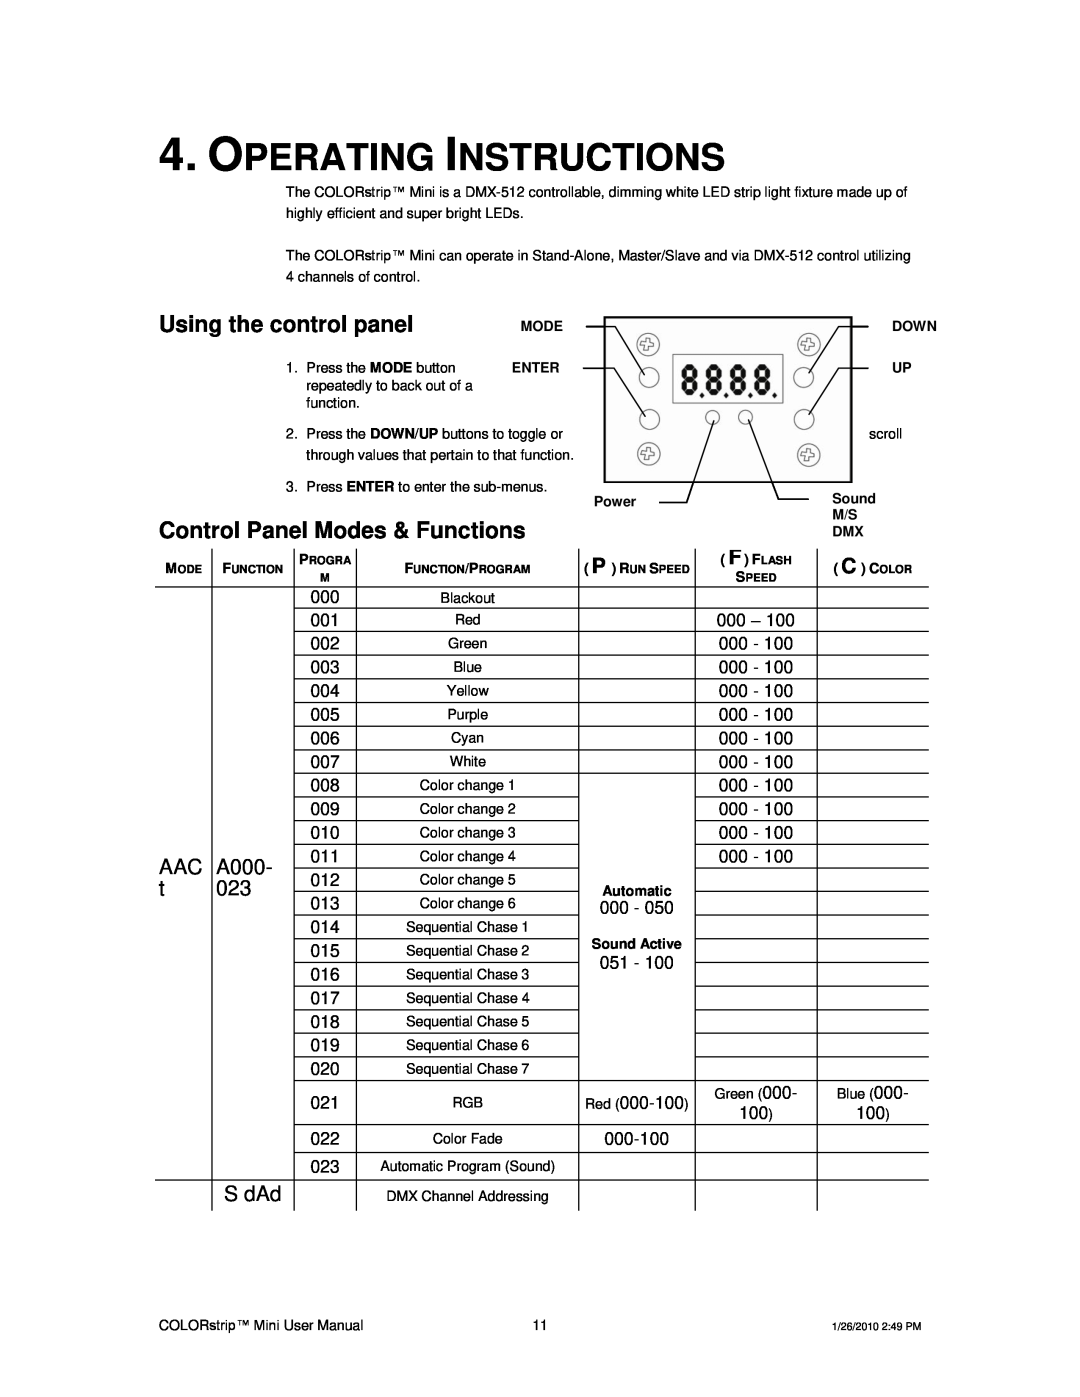 Chauvet Indoor Furnishings Operating Instructions, Using the control panel, Control Panel Modes & Functions, A000, S dAd 